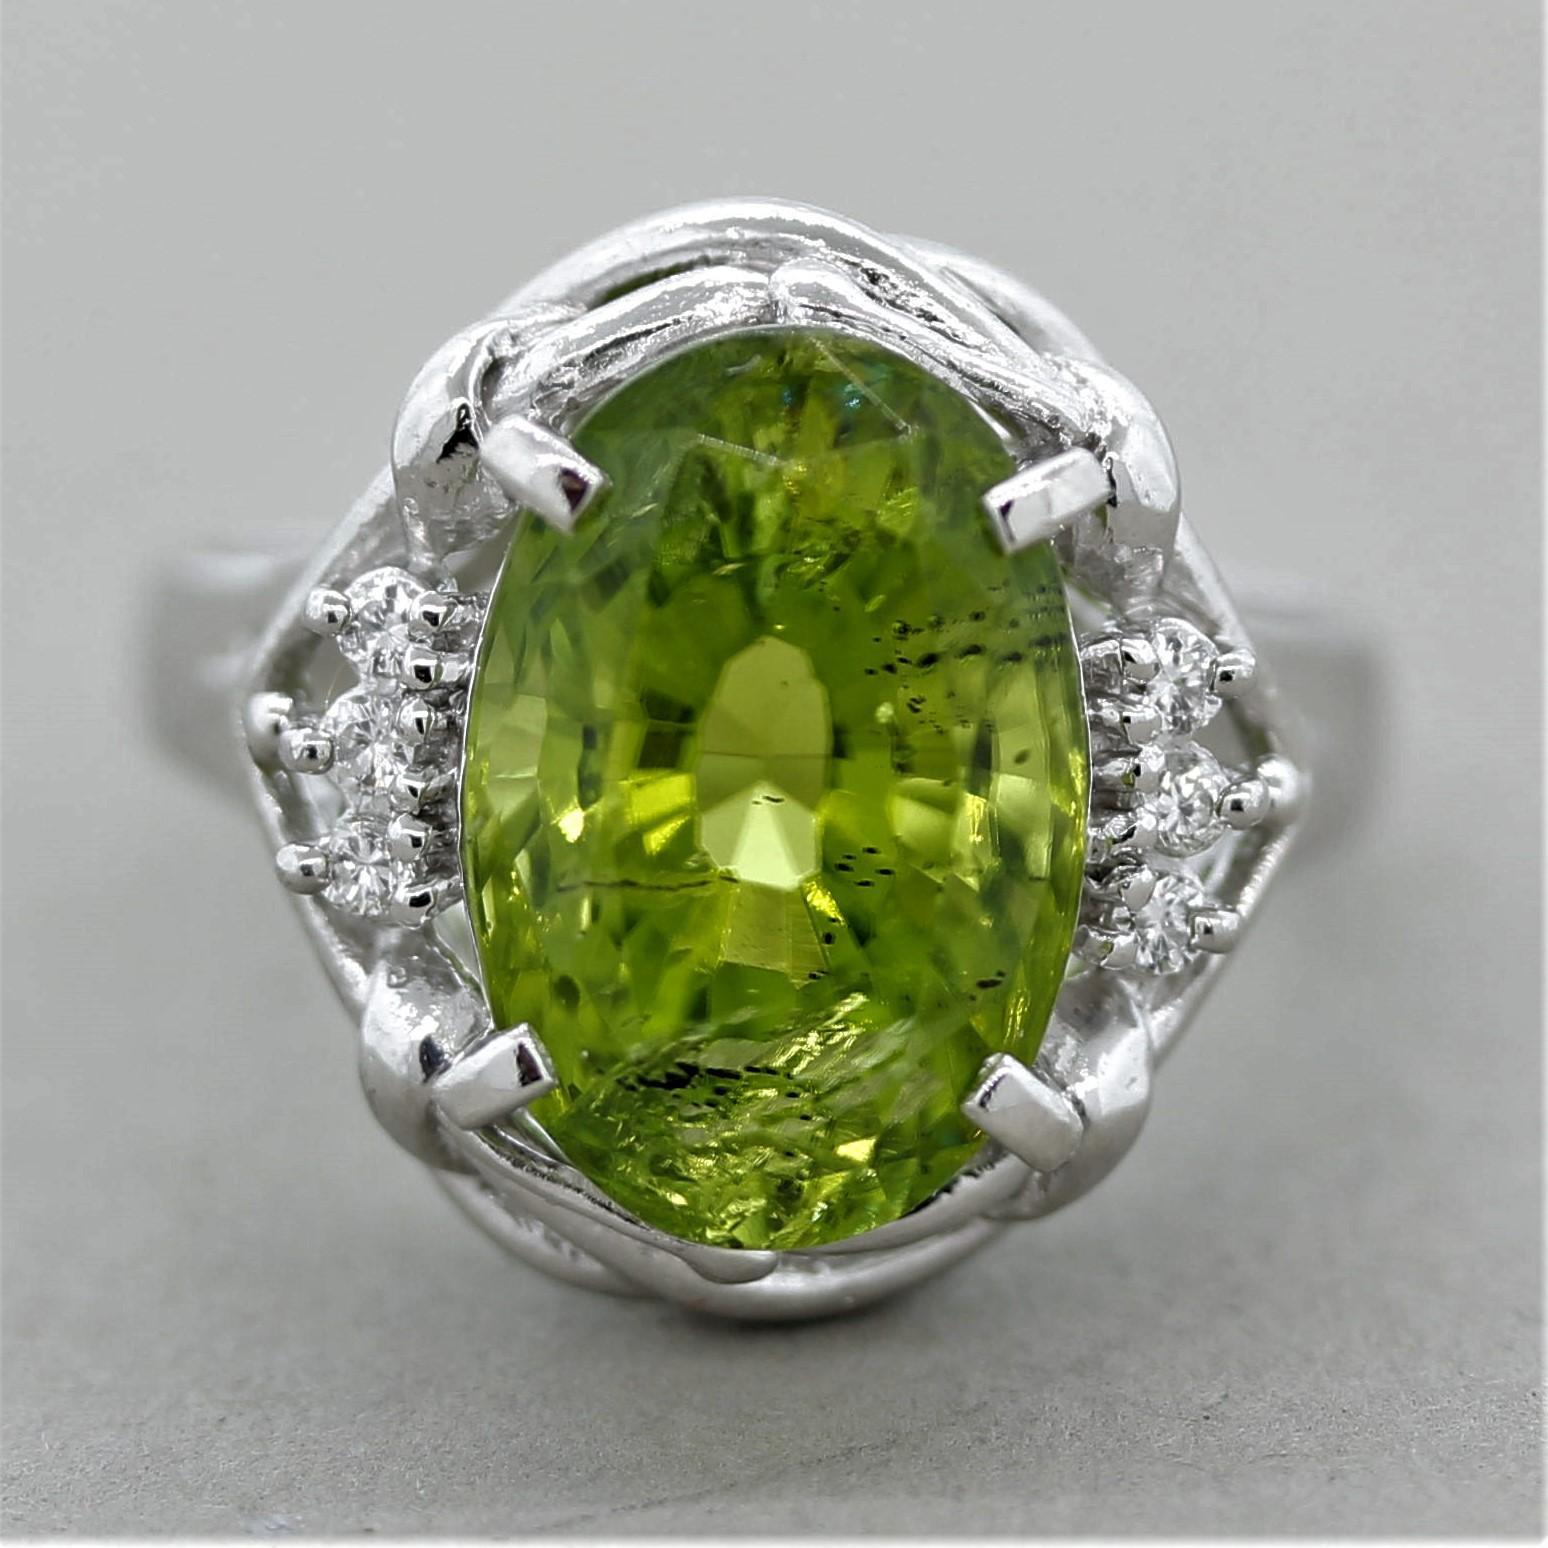 A platinum ring featuring a luscious 6.44 carat peridot. The oval shaped gem is accented by 6 round brilliant-cut diamonds weighing a total of 0.07 carats. Hand fabricated in platinum.

Ring Size 6.50